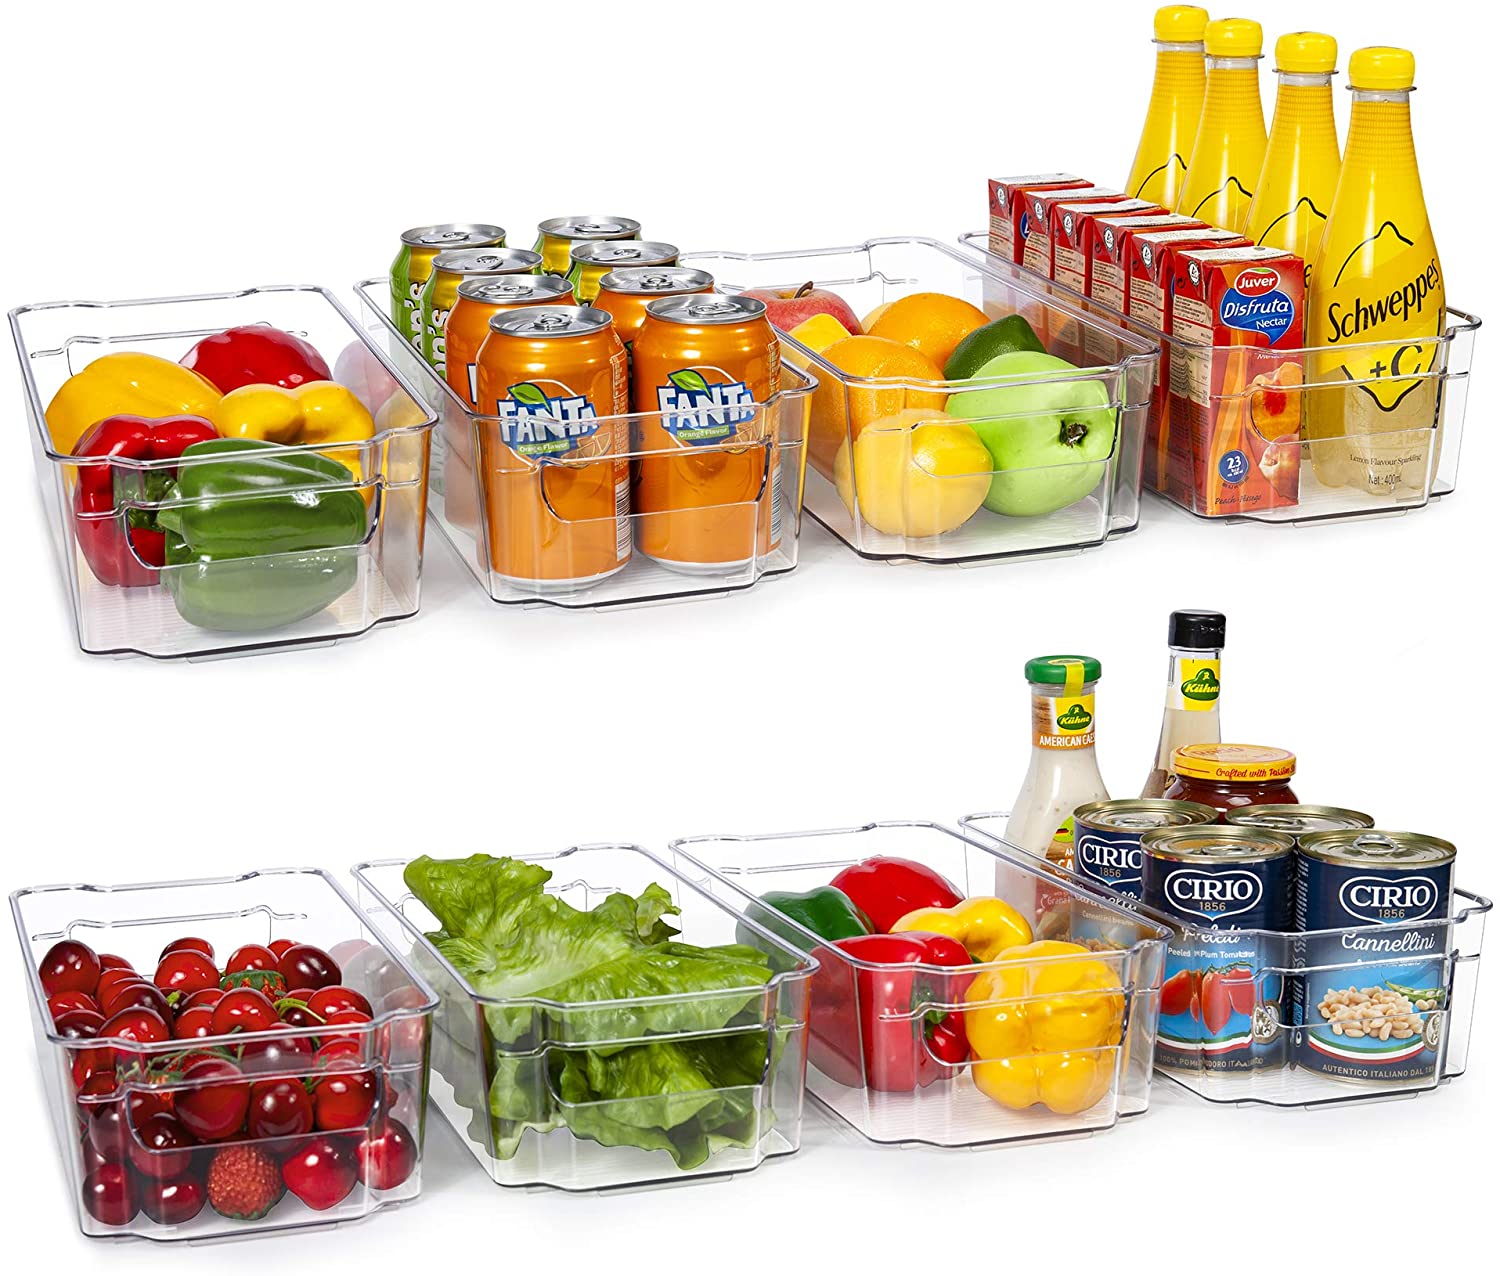 Clear Fridge Organizers To Help You Stop Wasting Food